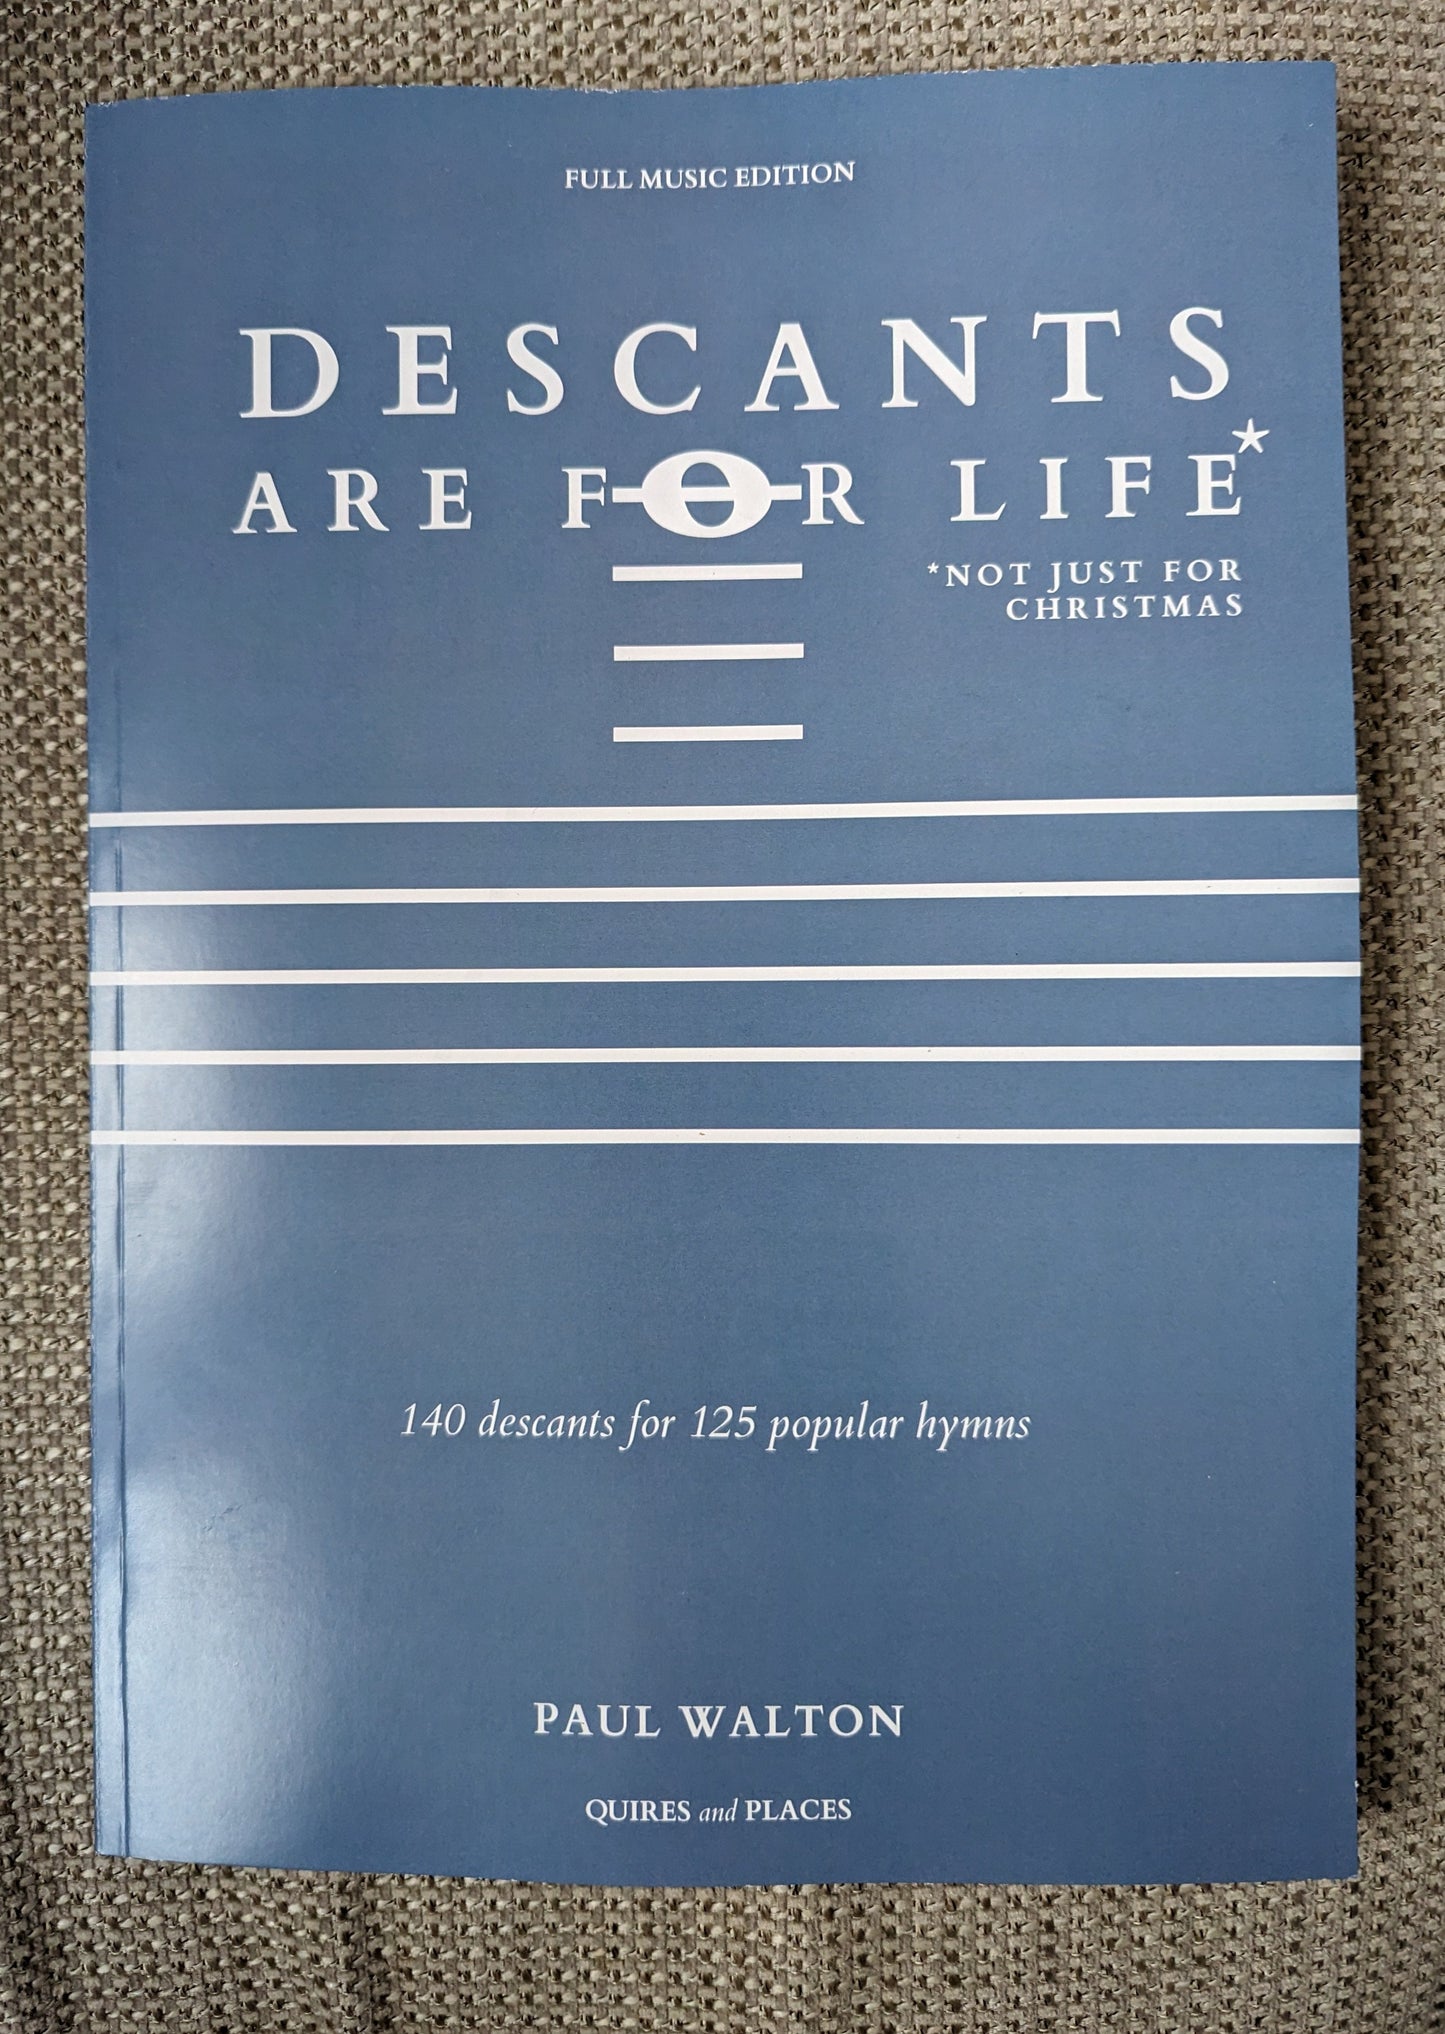 Walton, Paul: Descants are for Life (FULL MUSIC EDITION)